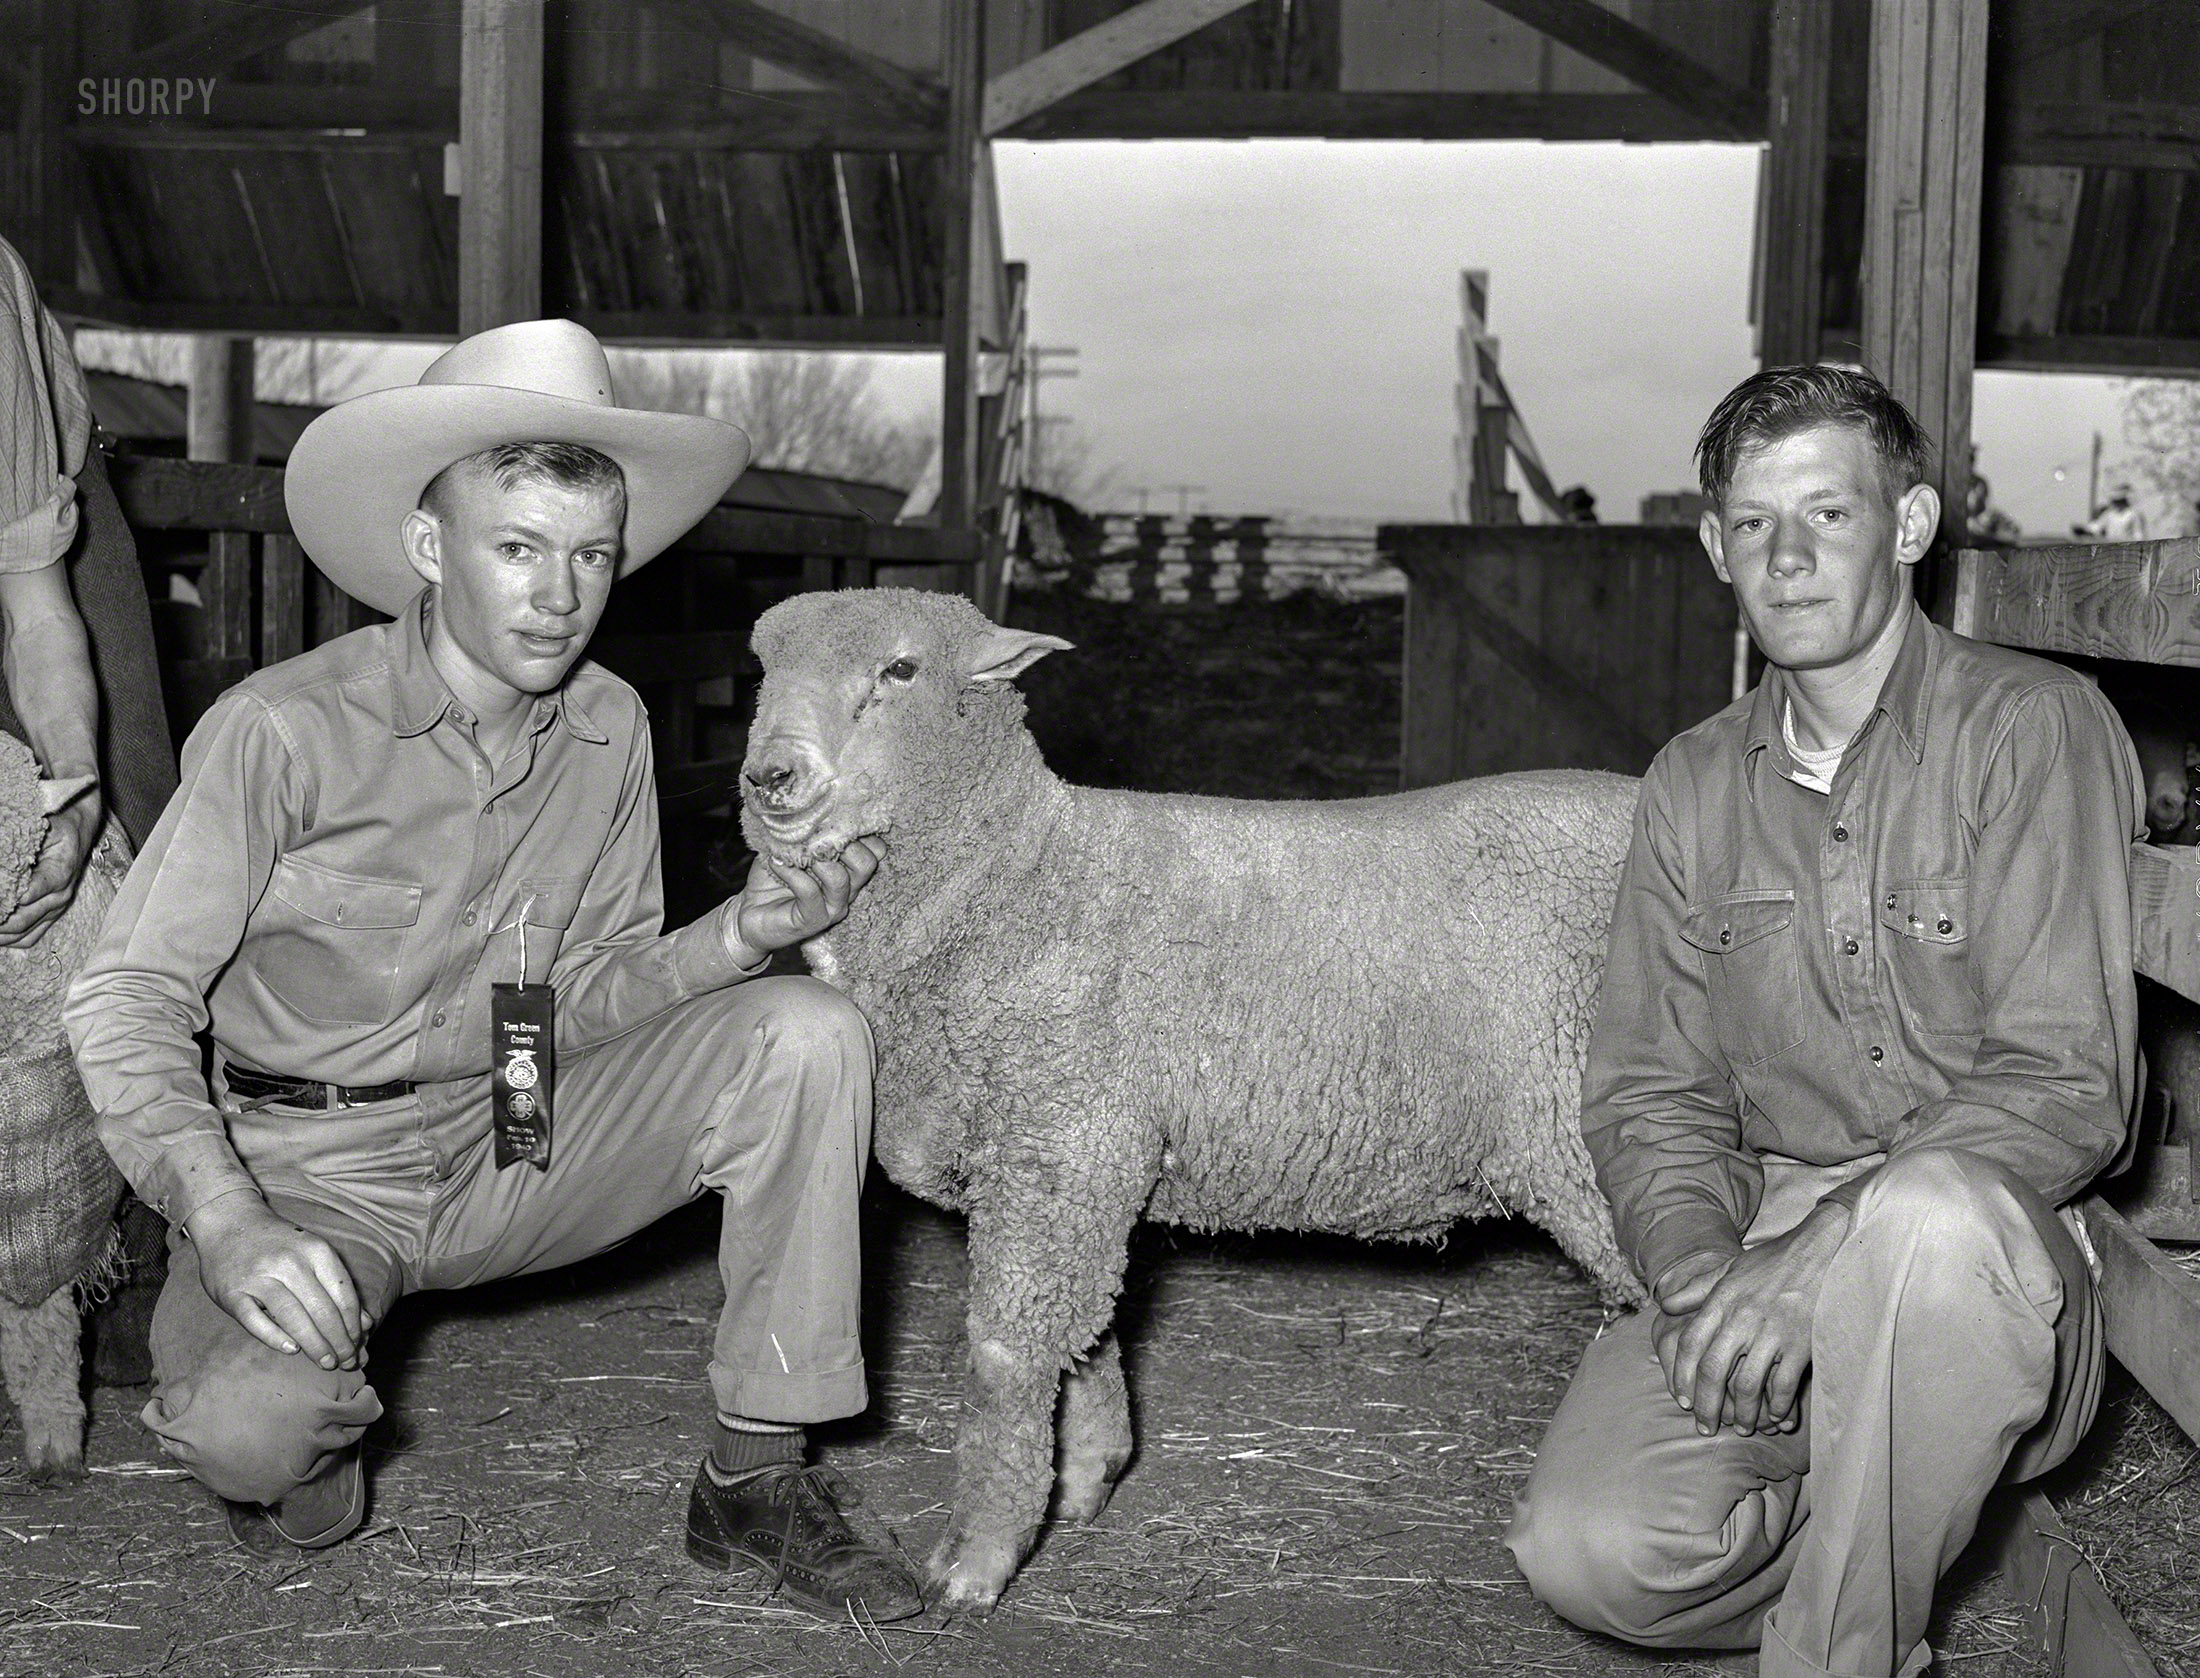 February 1940. San Angelo, Texas. "4-H Club boys from Tom Green County showing sheep at the San Angelo Fat Stock Show." Medium format negative by Russell Lee for the Farm Security Administration. View full size.